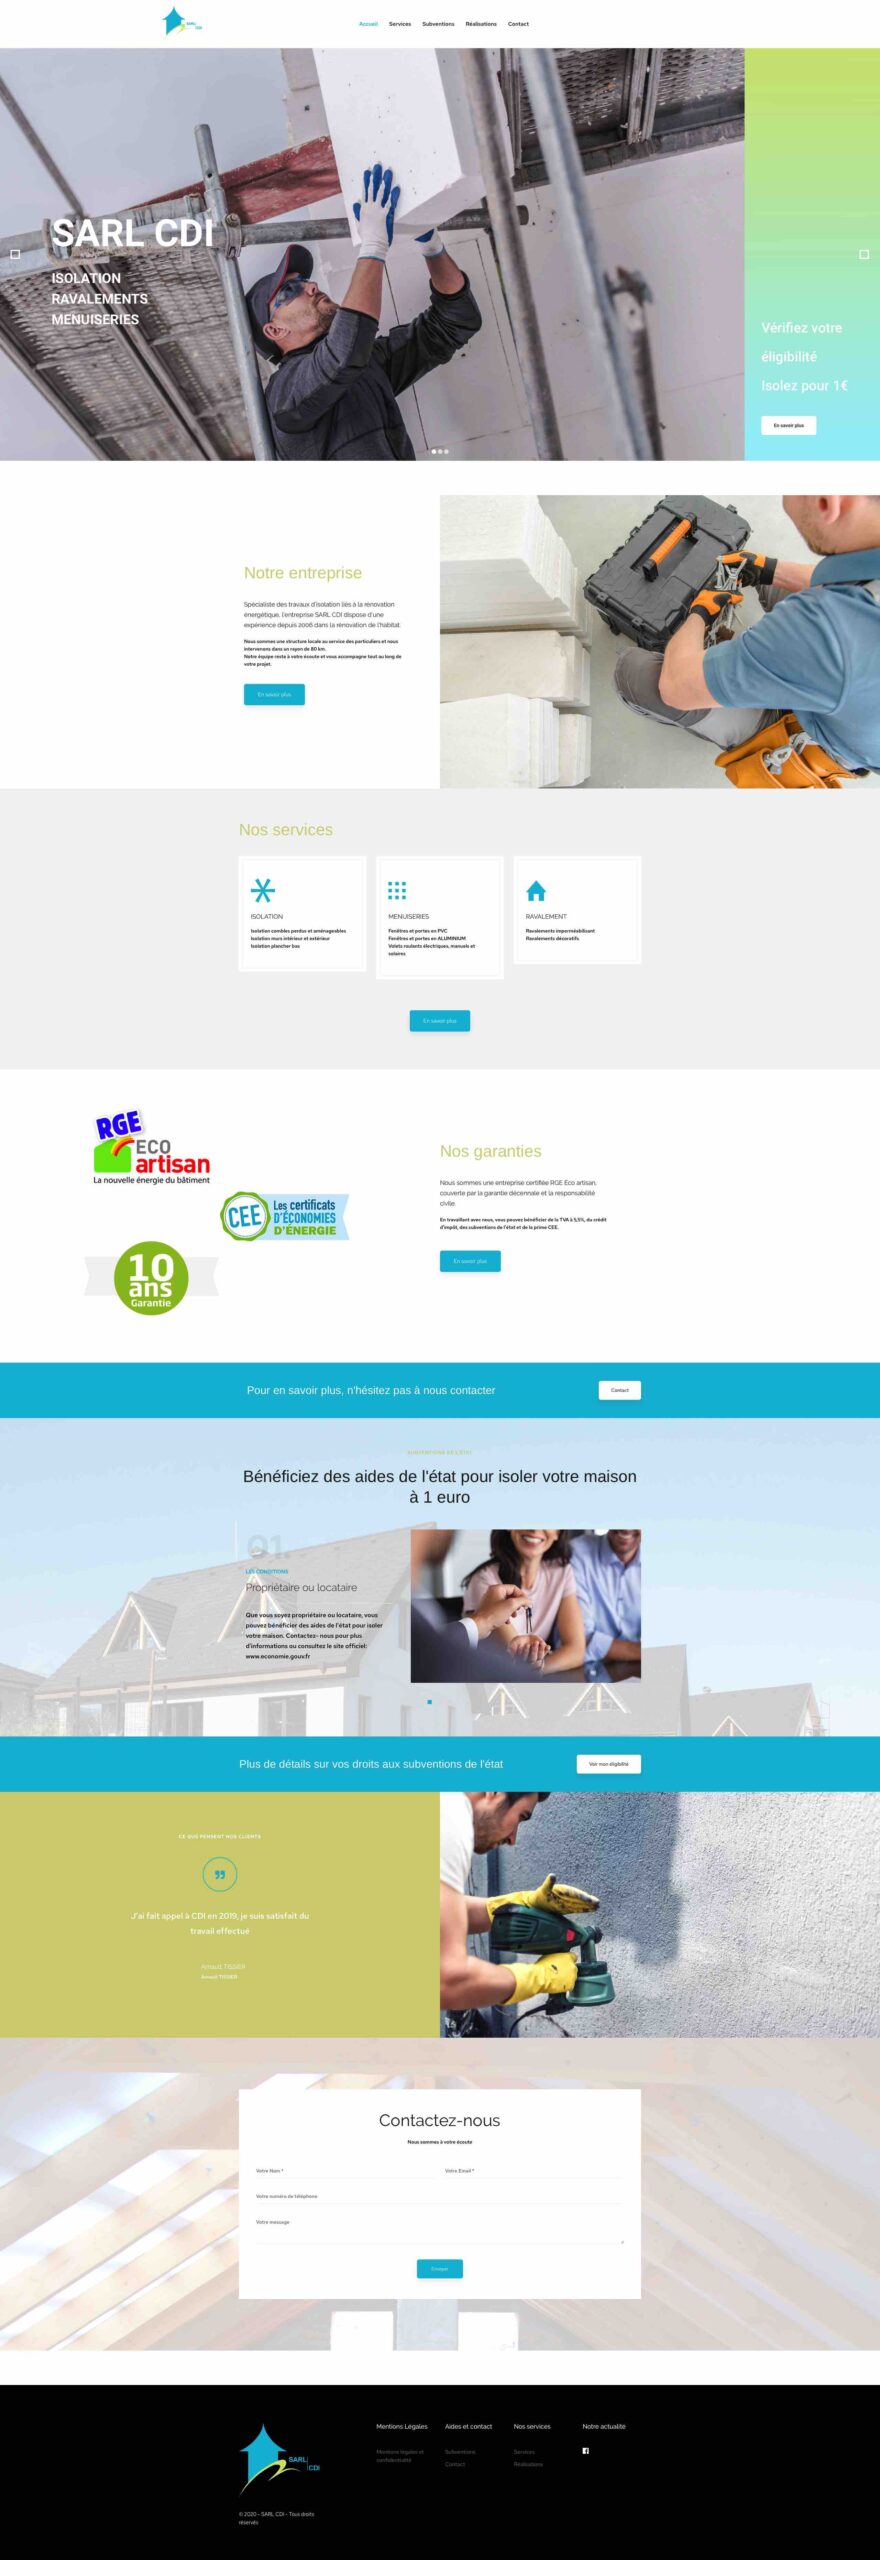 ANGELIQUE DAMOUR - Projet SARL CDI - home page full screen